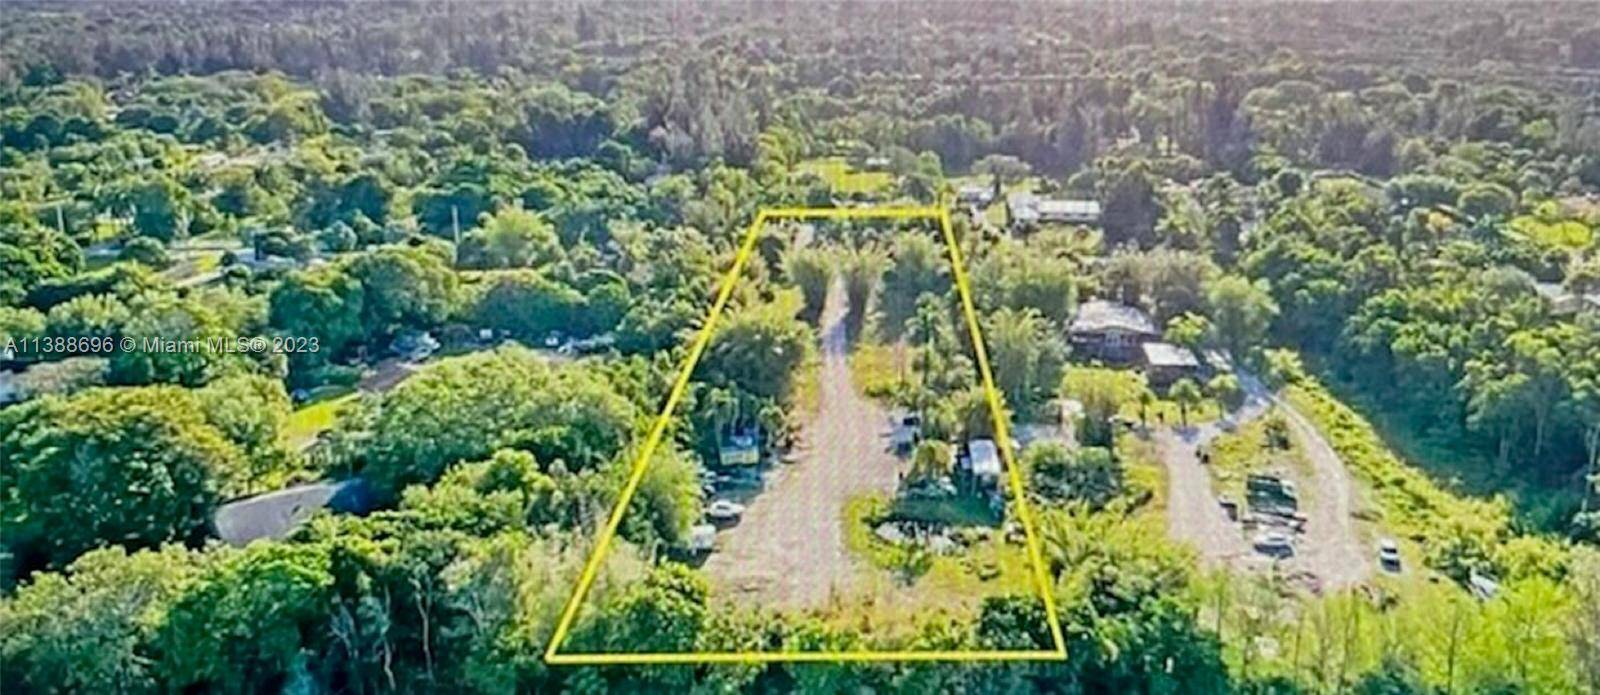 BEAUTIFUL 2. 5 ACRE PARCEL IN THE HEART OF SOUTHWEST RANCHES.